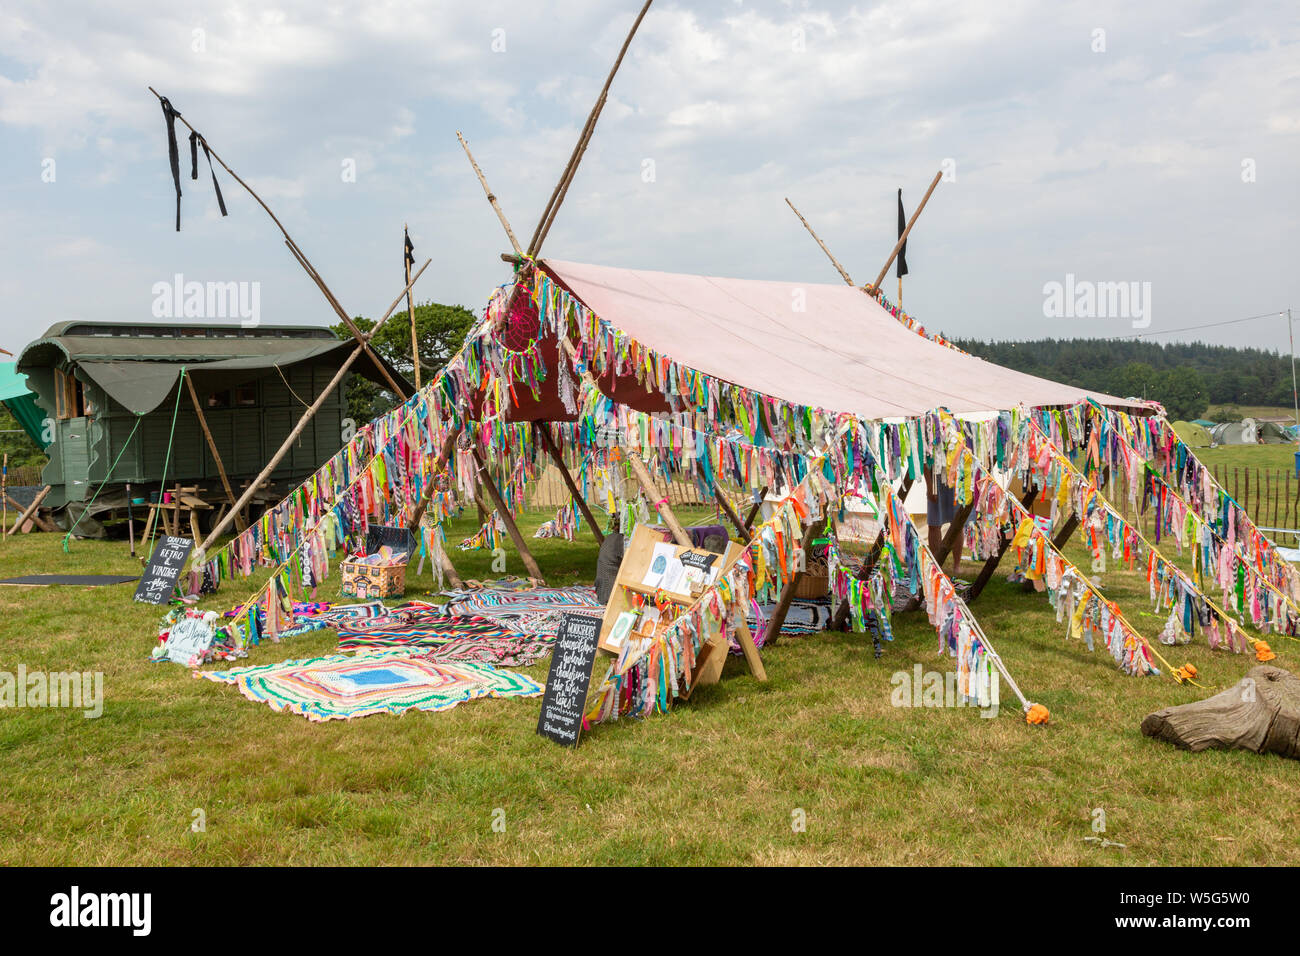 A tent adorned with colourful rags at a festival, UK Stock Photo